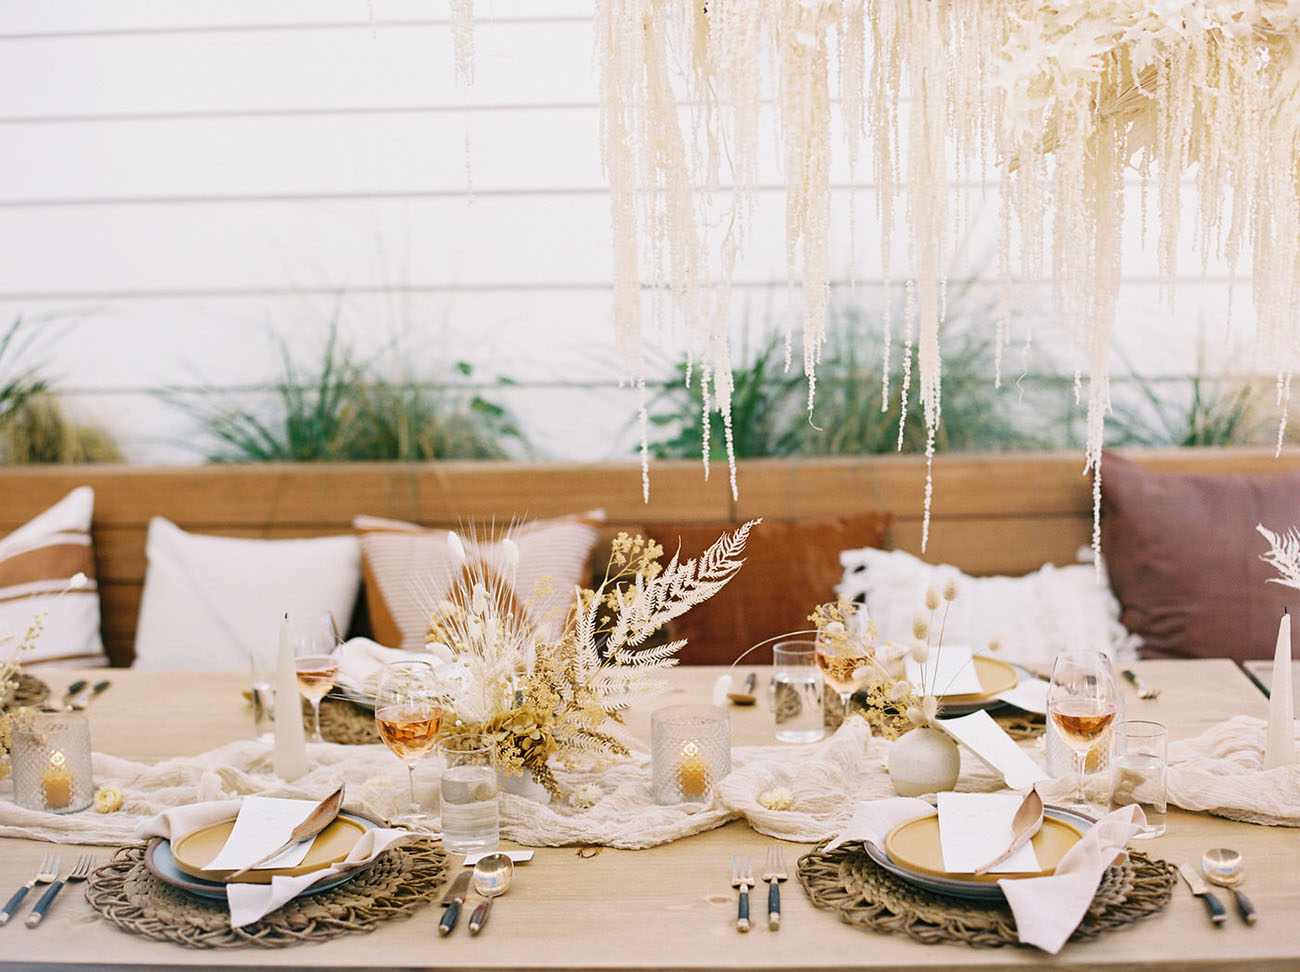 Candles and an airy table runner added chic to the reception table